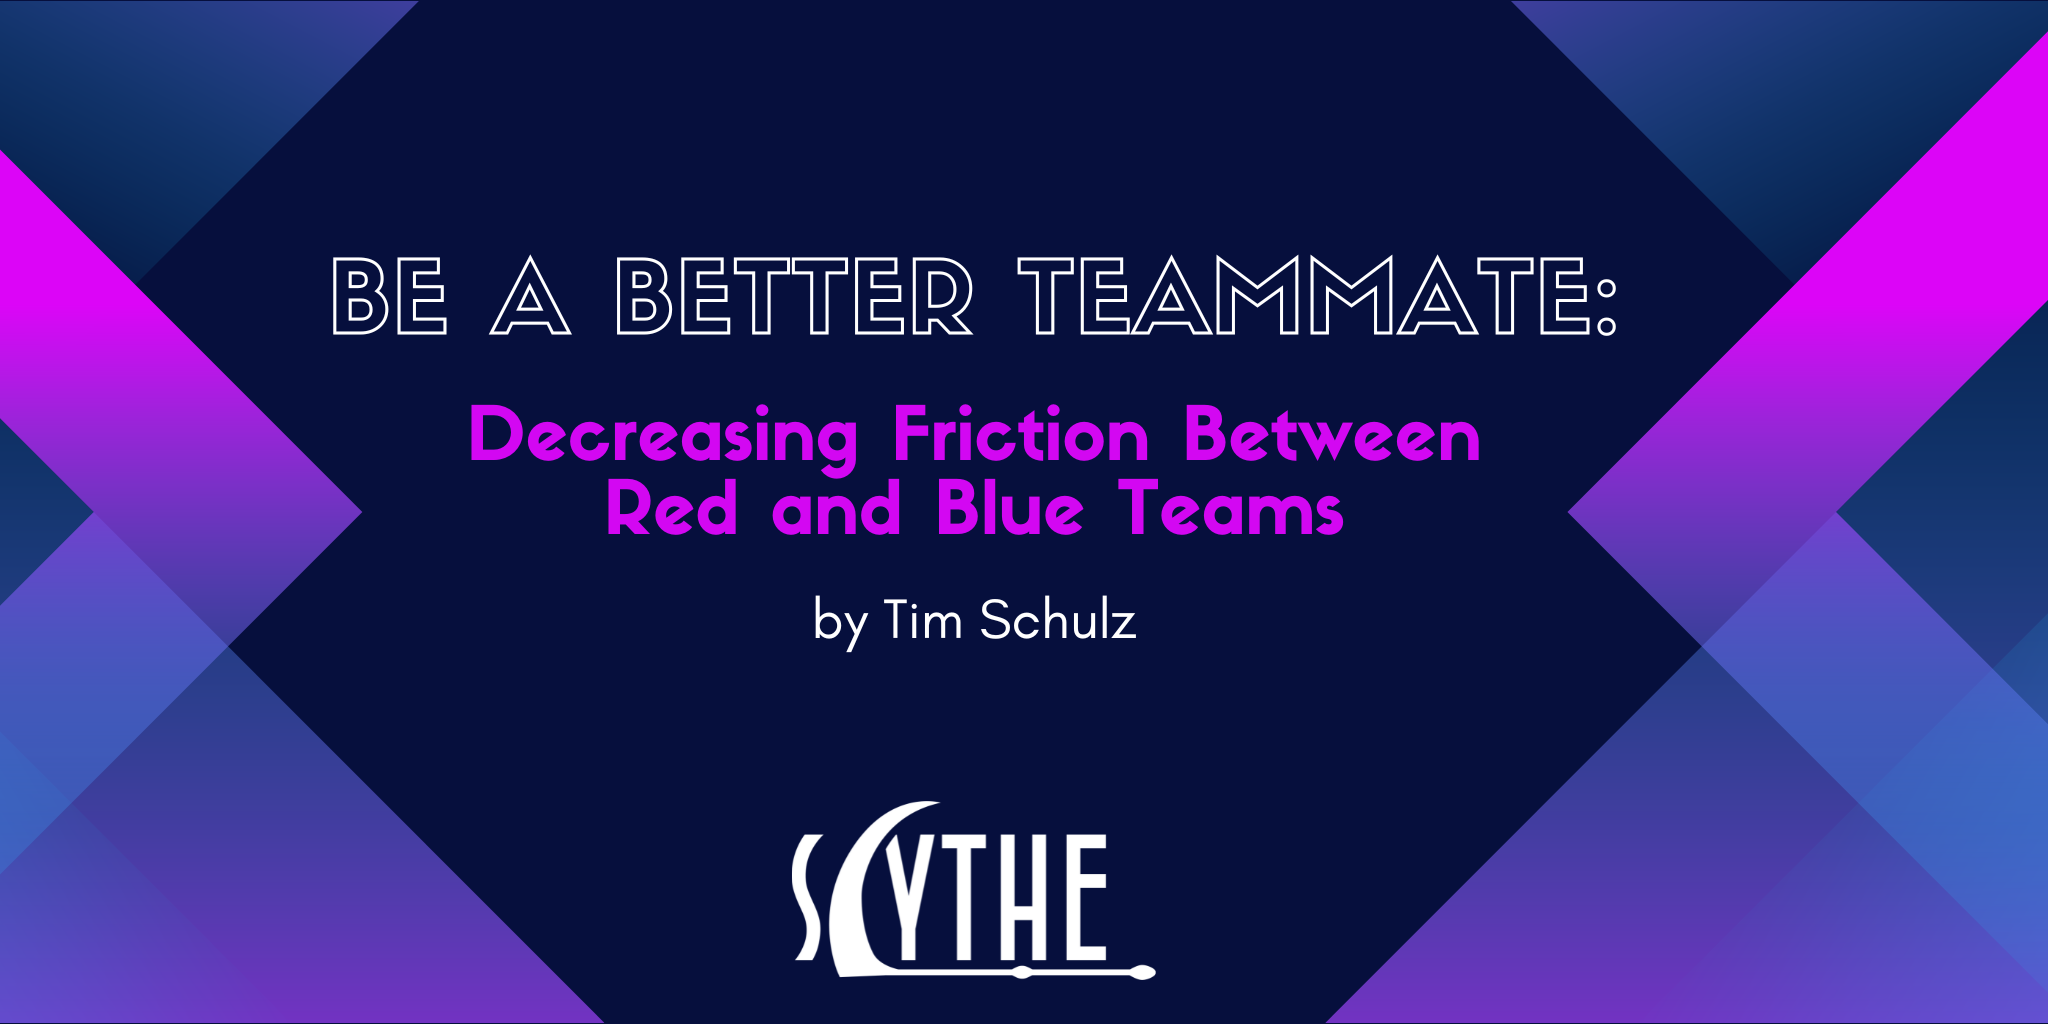 Be a Better Teammate: Decreasing Friction Between Red and Blue Teams